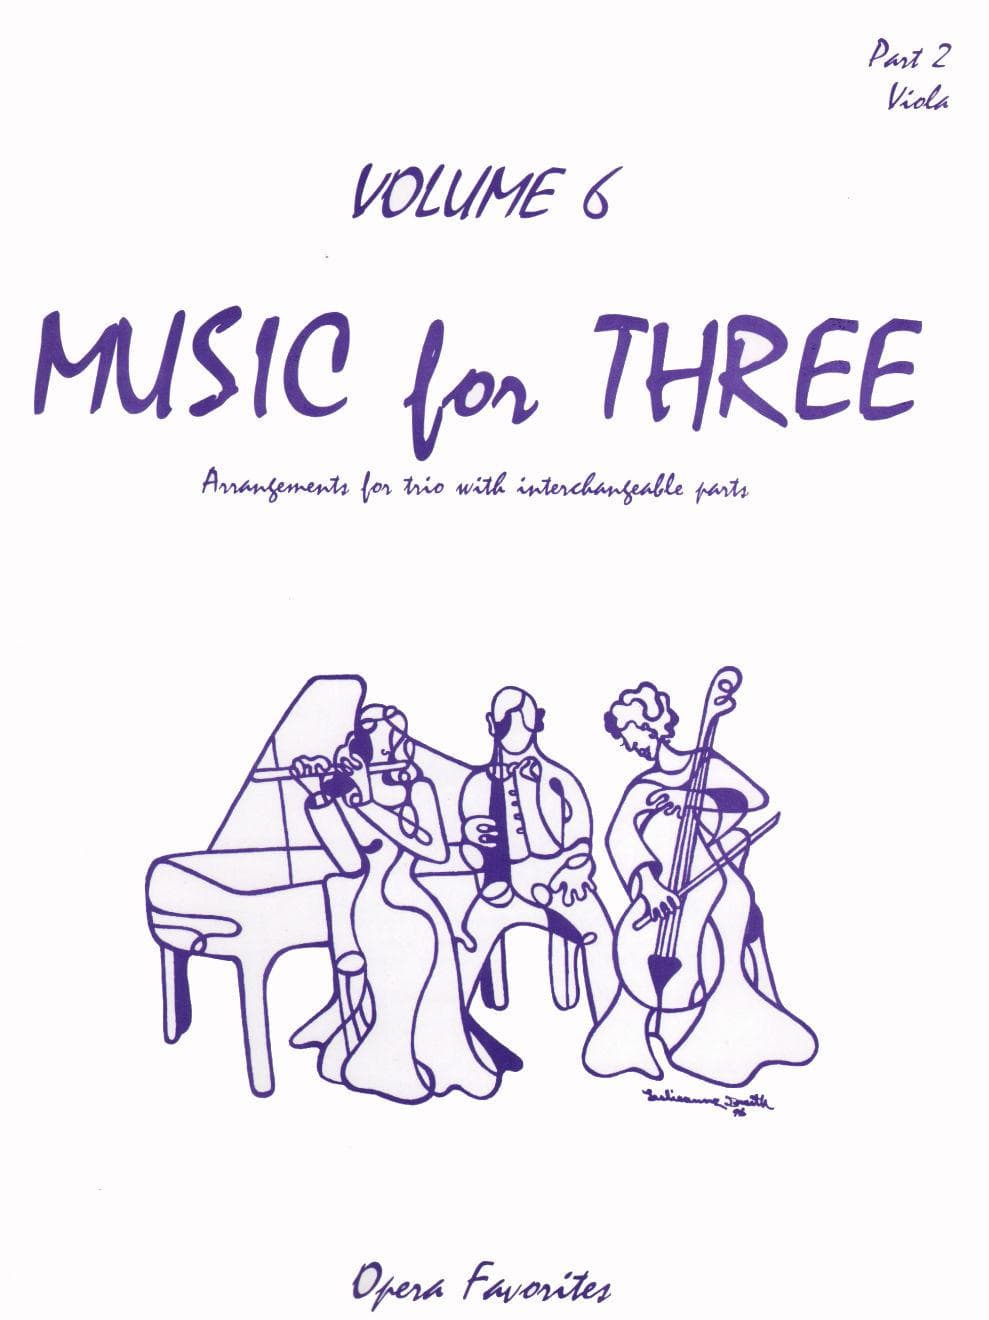 Music for Three Volume 6 Part 2, Viola Published by Last Resort Music